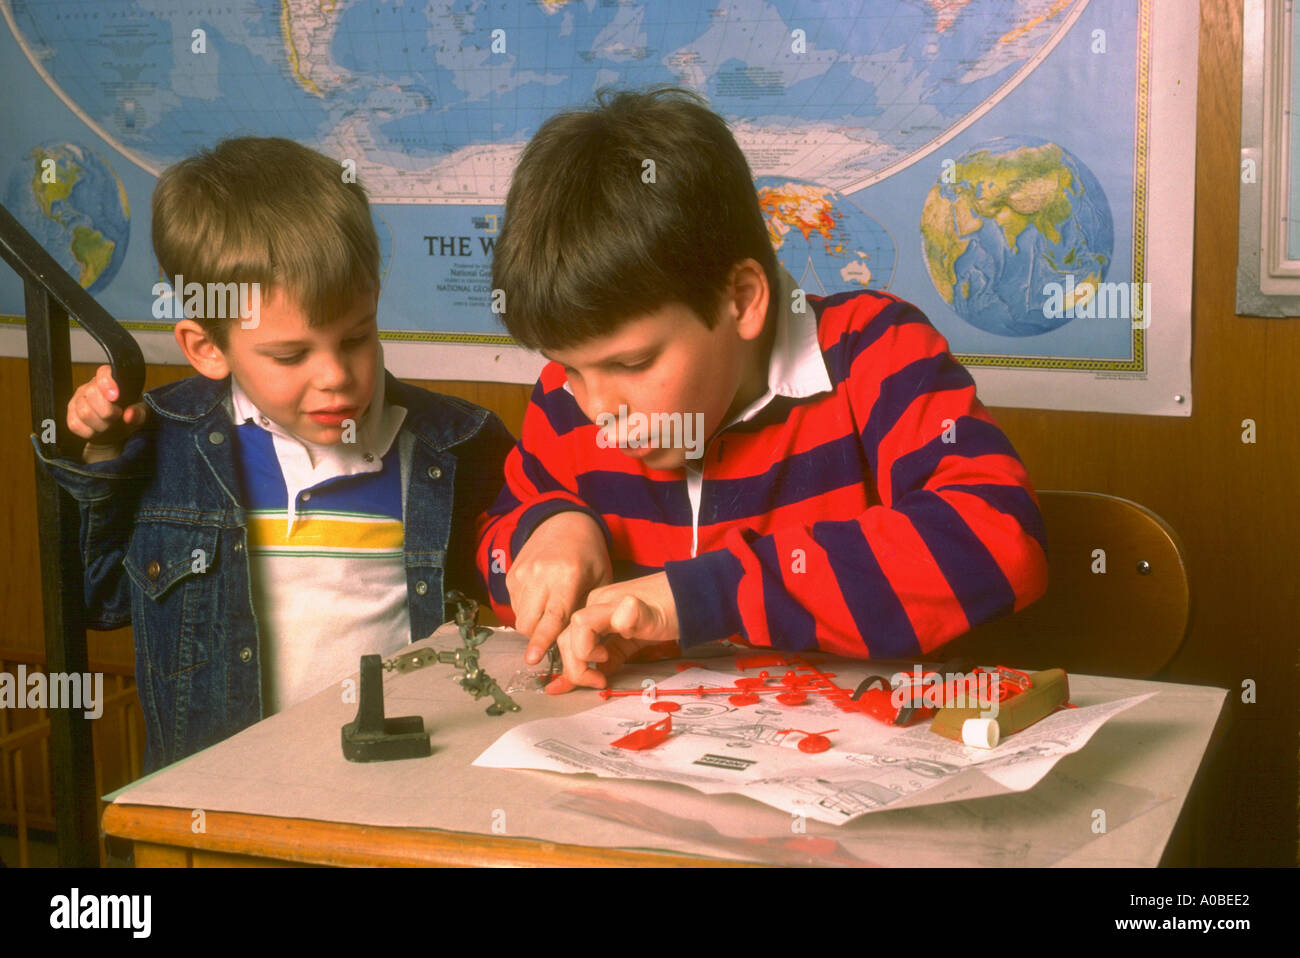 Two boys build model together Part of a series on home schooling Also see JHP1007 Stock Photo